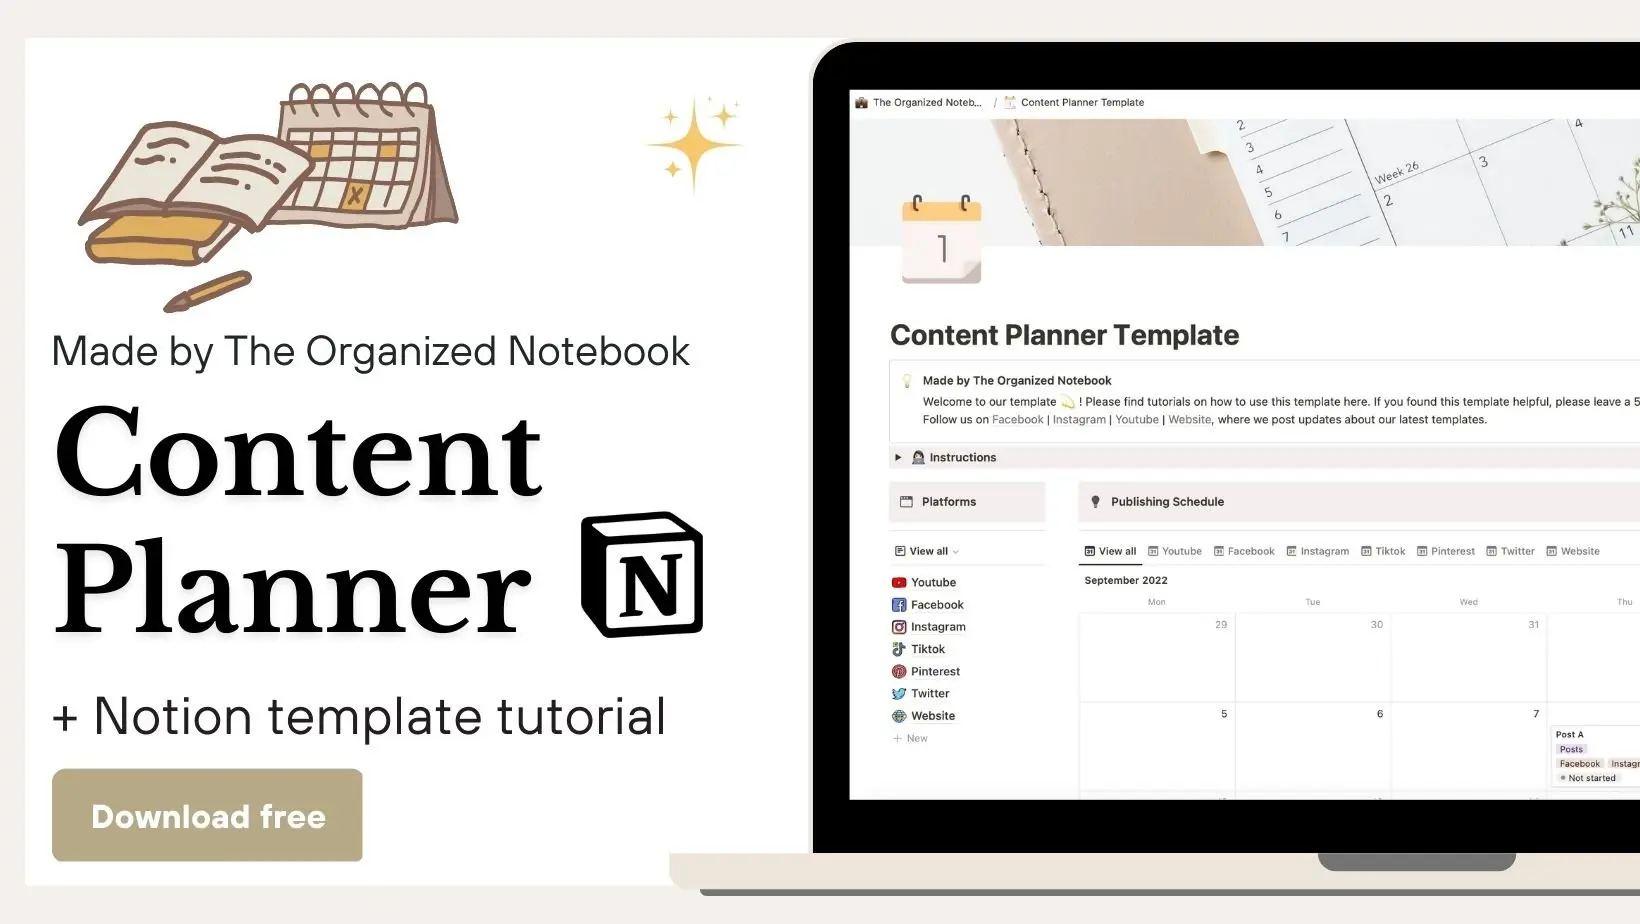 Content Planner Notion Template image